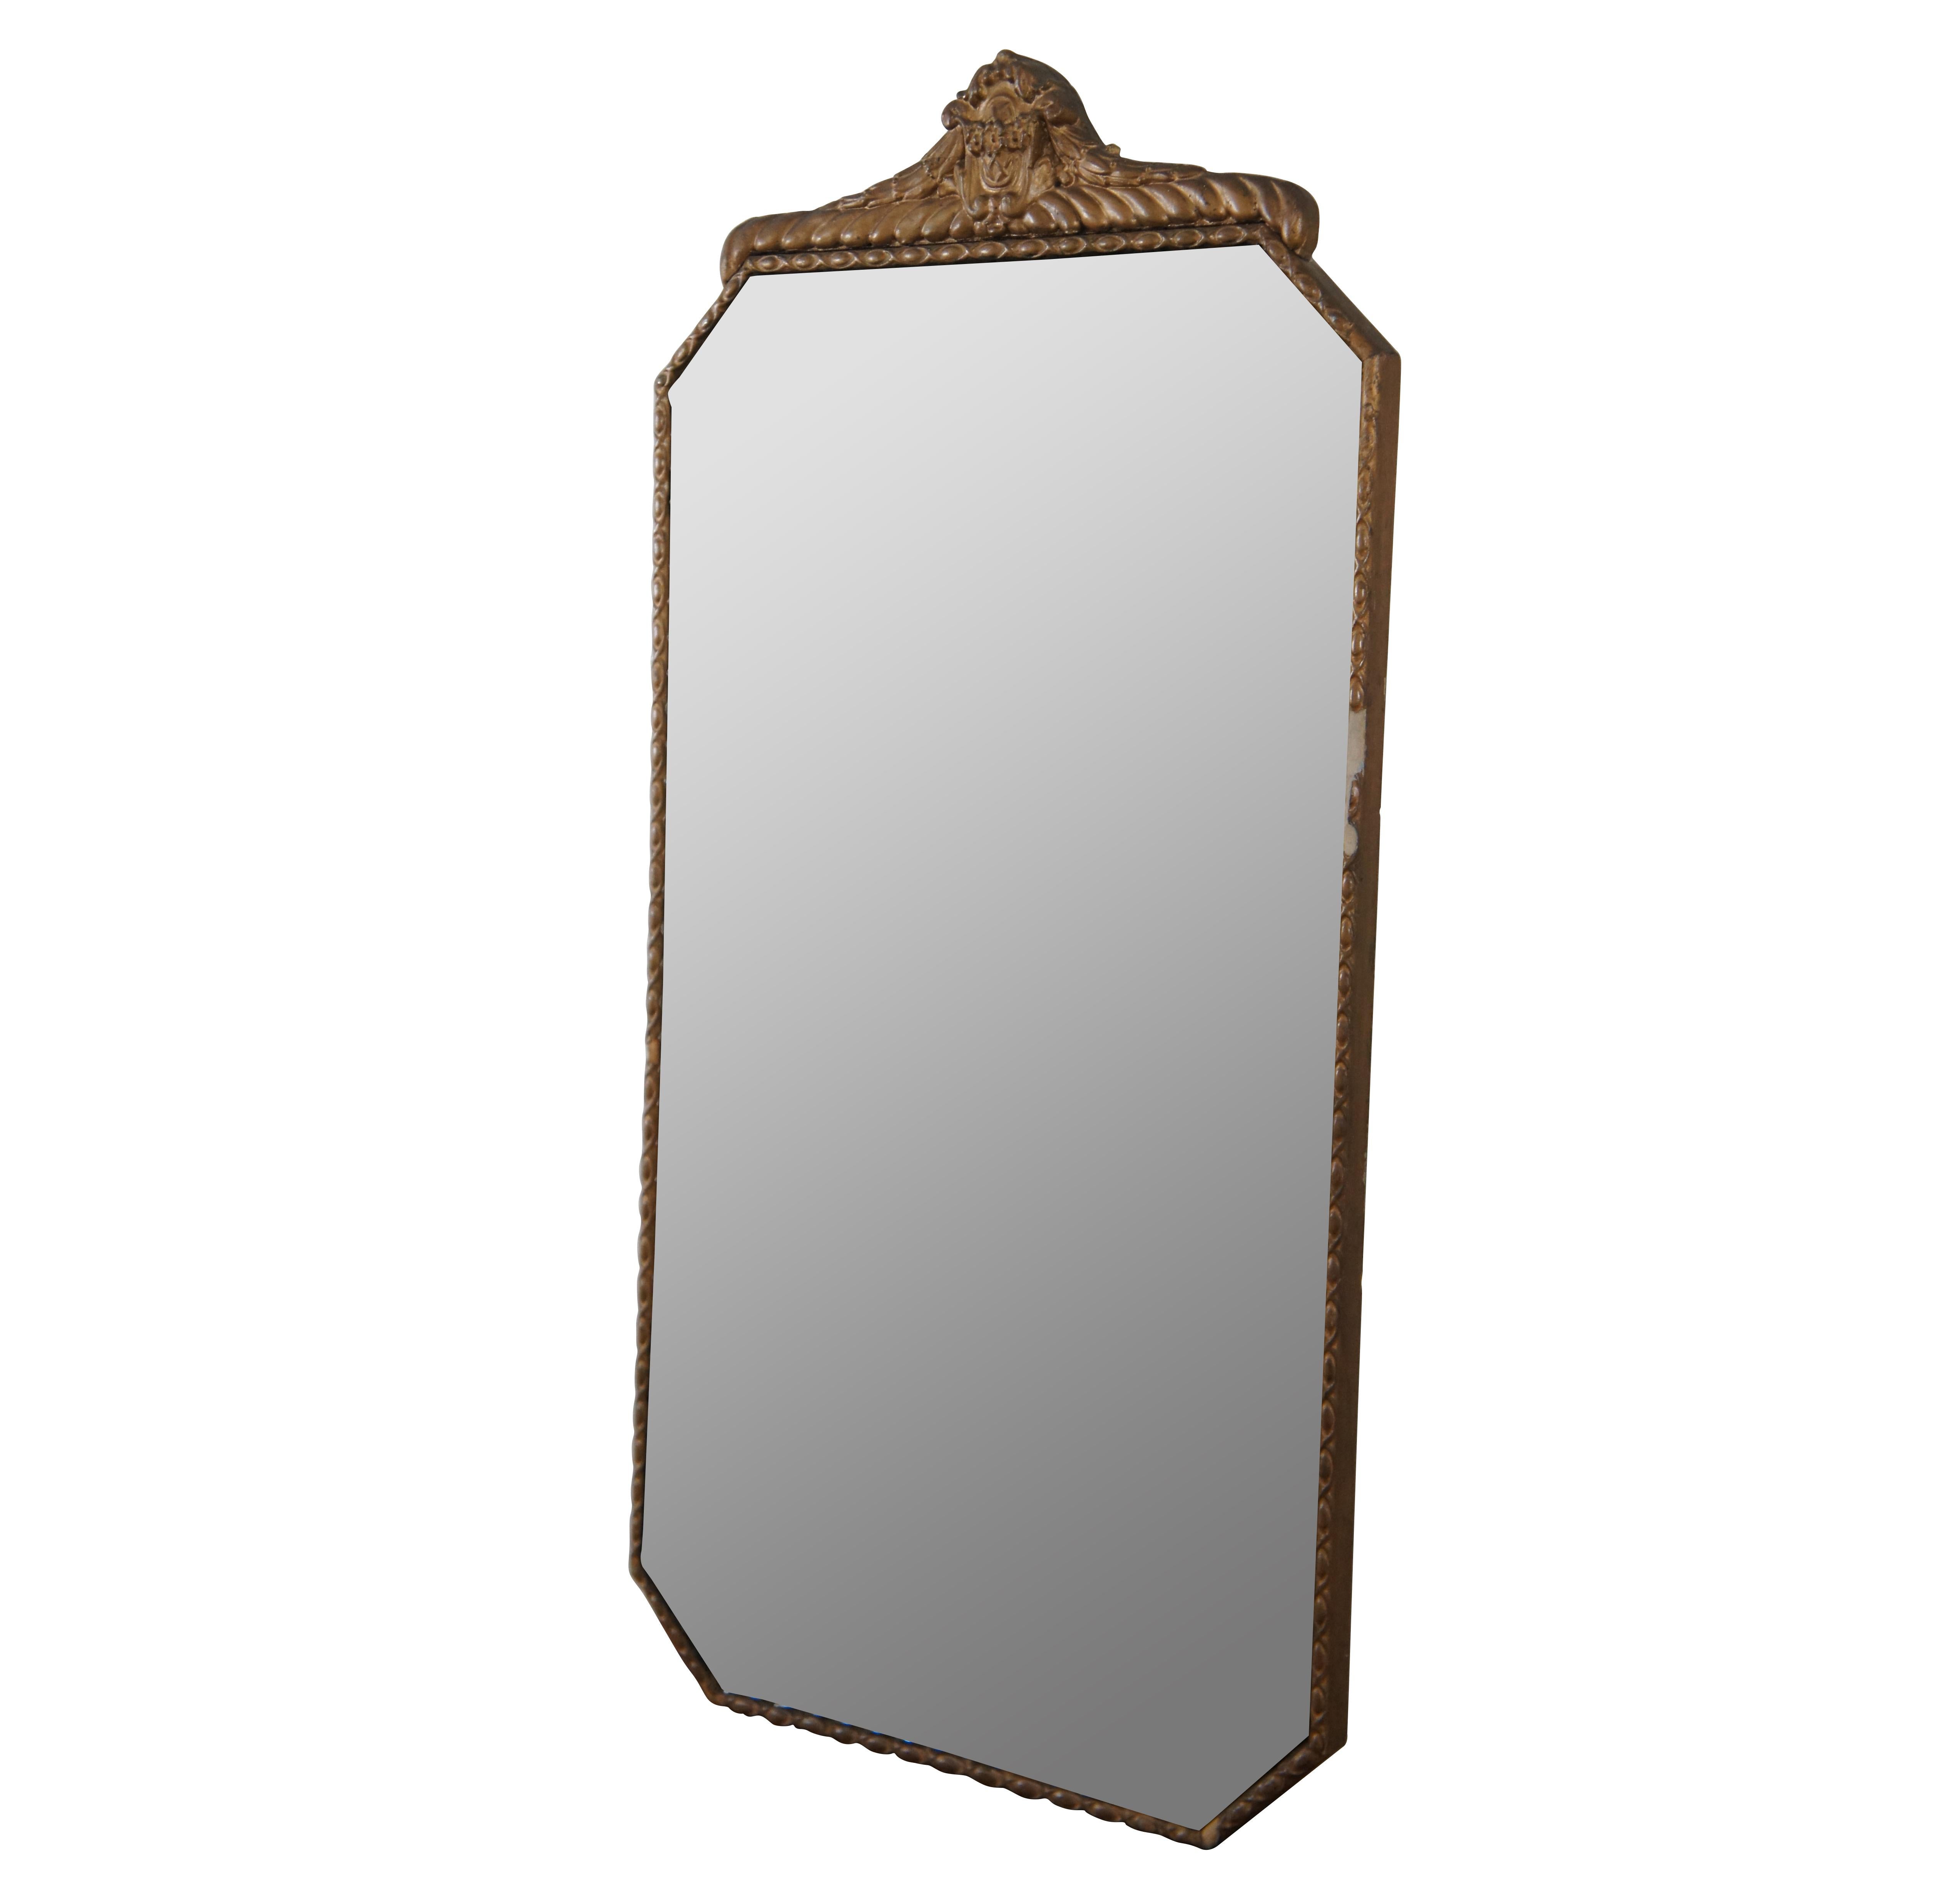 Antique early 20th century art deco wall mirror by the H. Neuer Glass Company of Cincinnati, Ohio – features a rectangular form with octagonal cut corners and a scalloped pattern along the edge of the glass, etched with a cascading leafing vine,